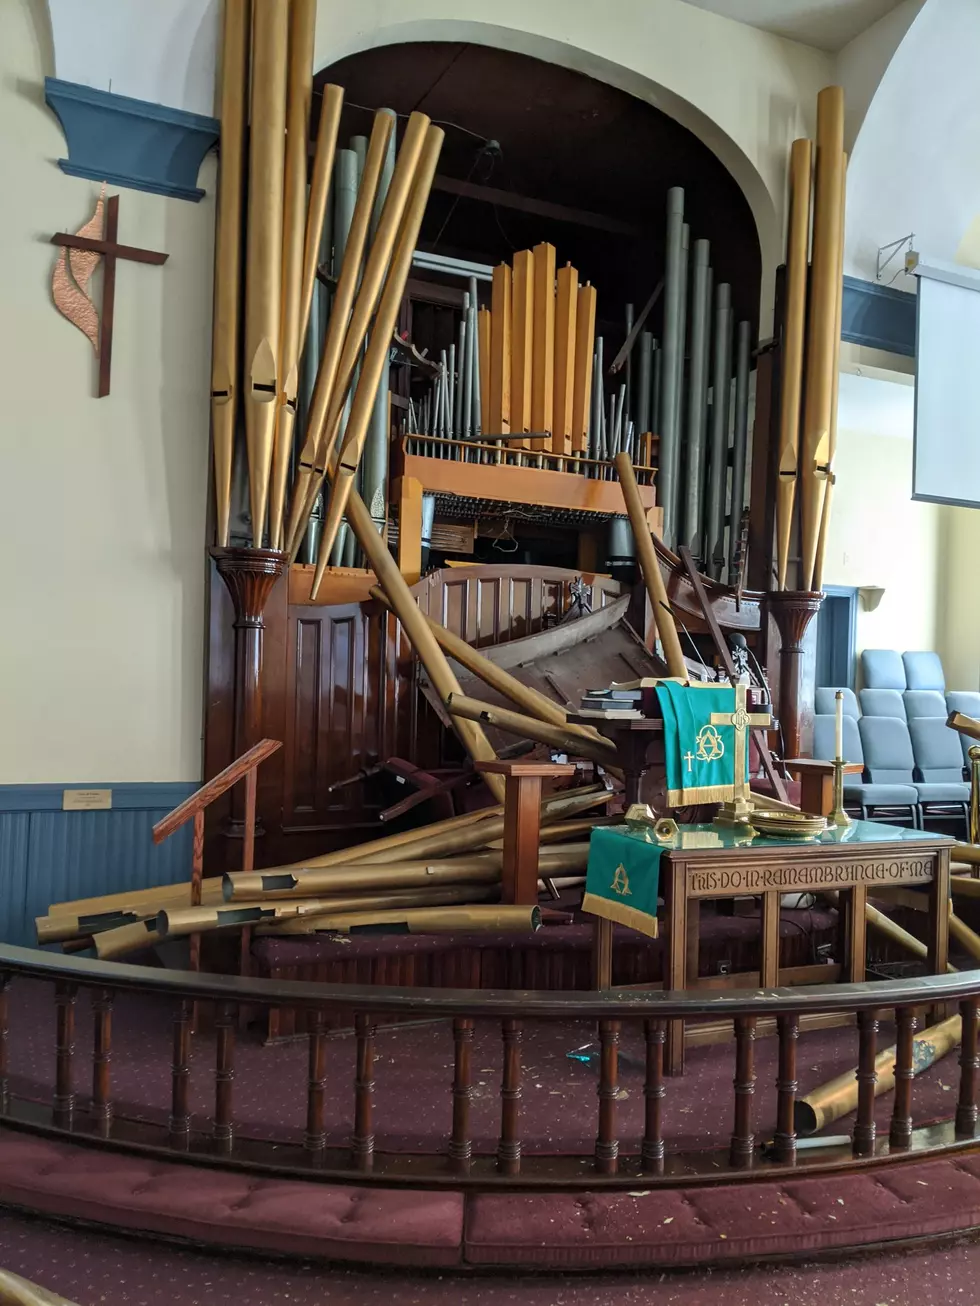 For Whom the Vandals Toll! Someone stole pipes from Freehold Boro church